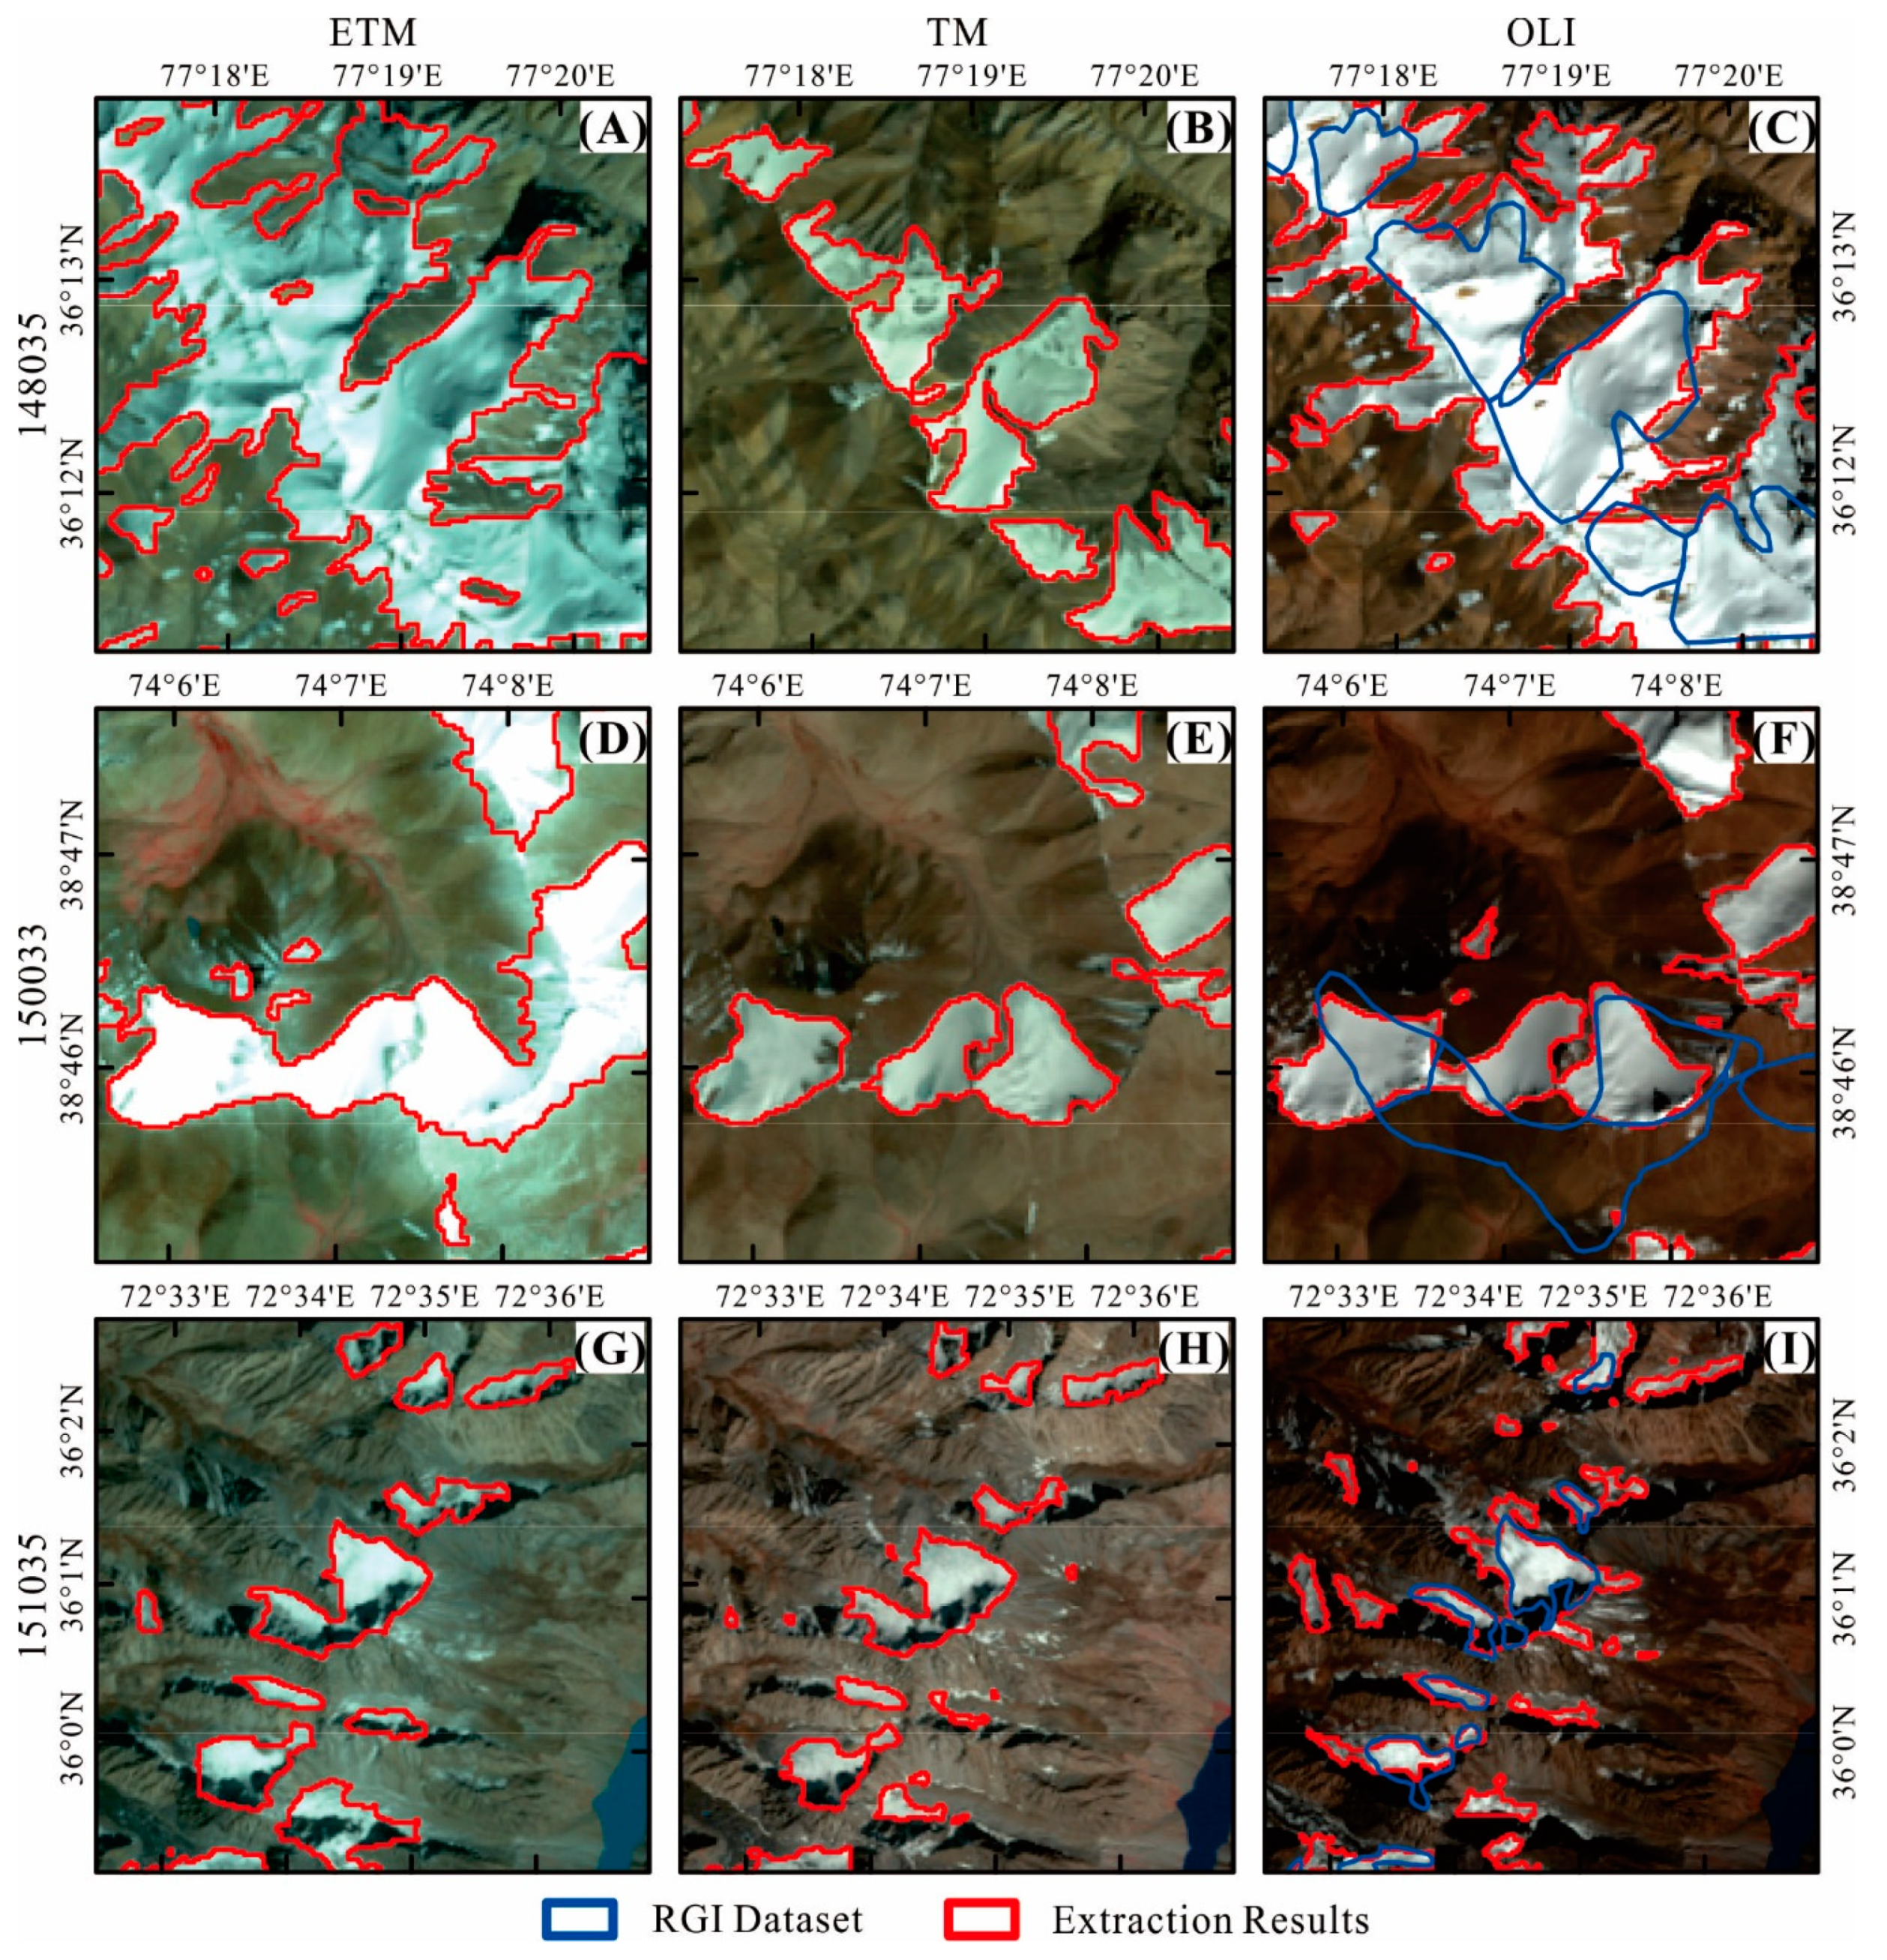 Remote Sensing Free Full Text An Automated Method For Surface Ice Snow Mapping Based On Objects And Pixels From Landsat Imagery In A Mountainous Region Html